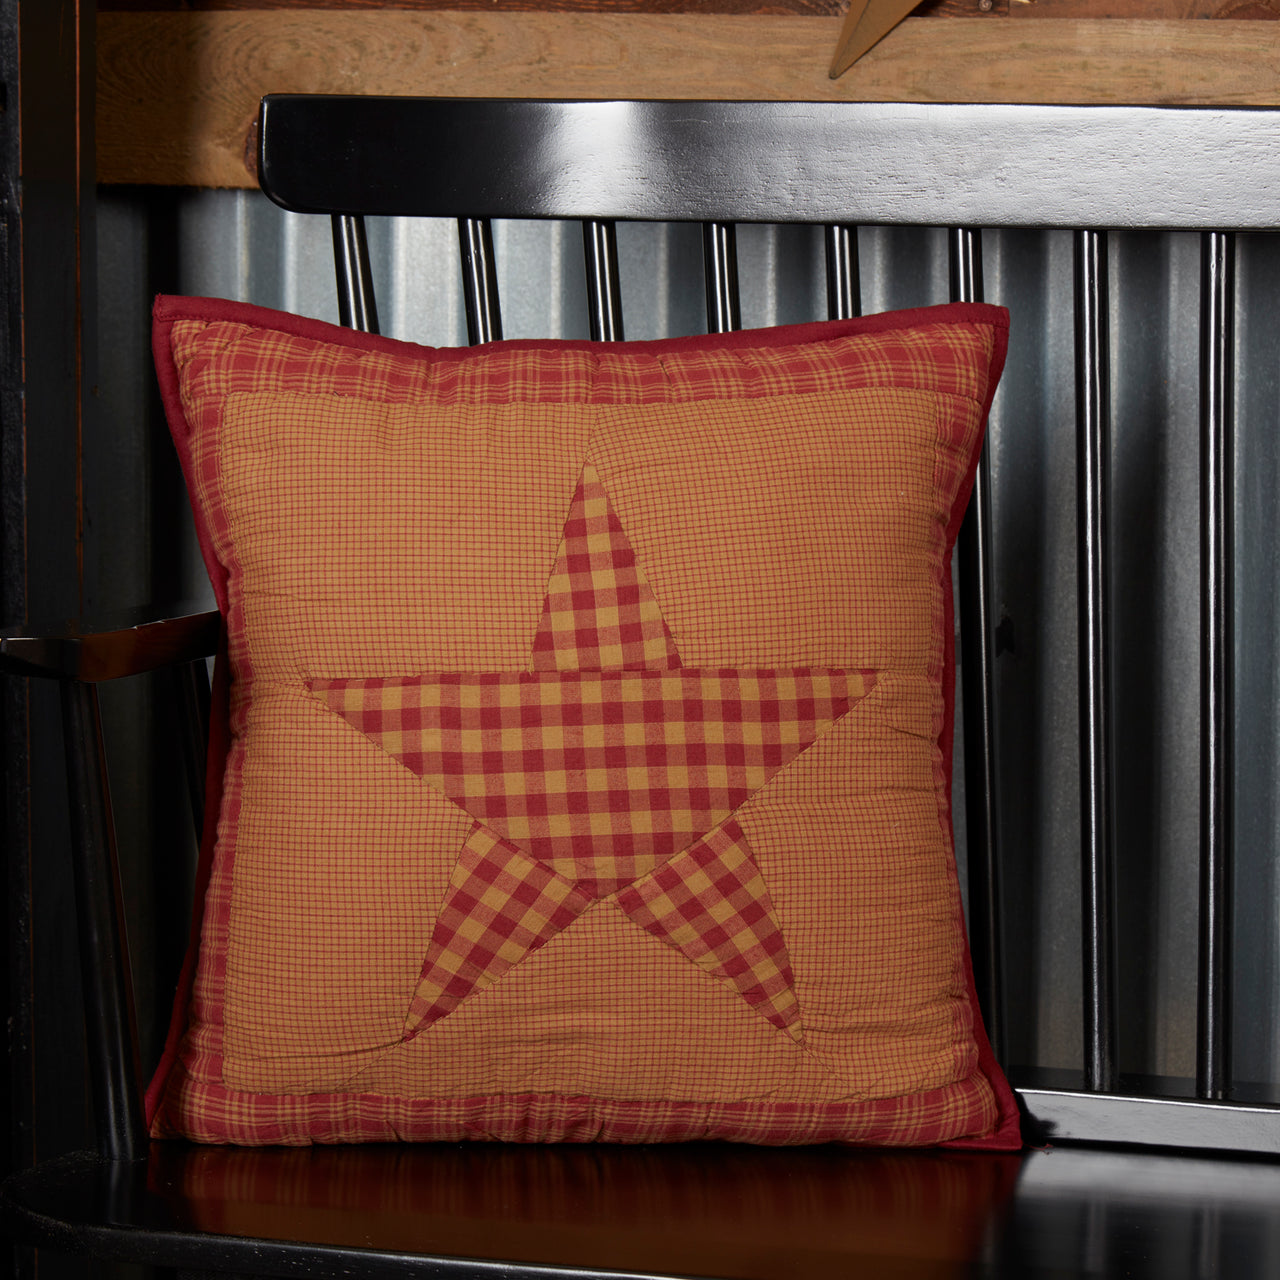 Ninepatch Star Quilted Pillow 16x16 VHC Brands